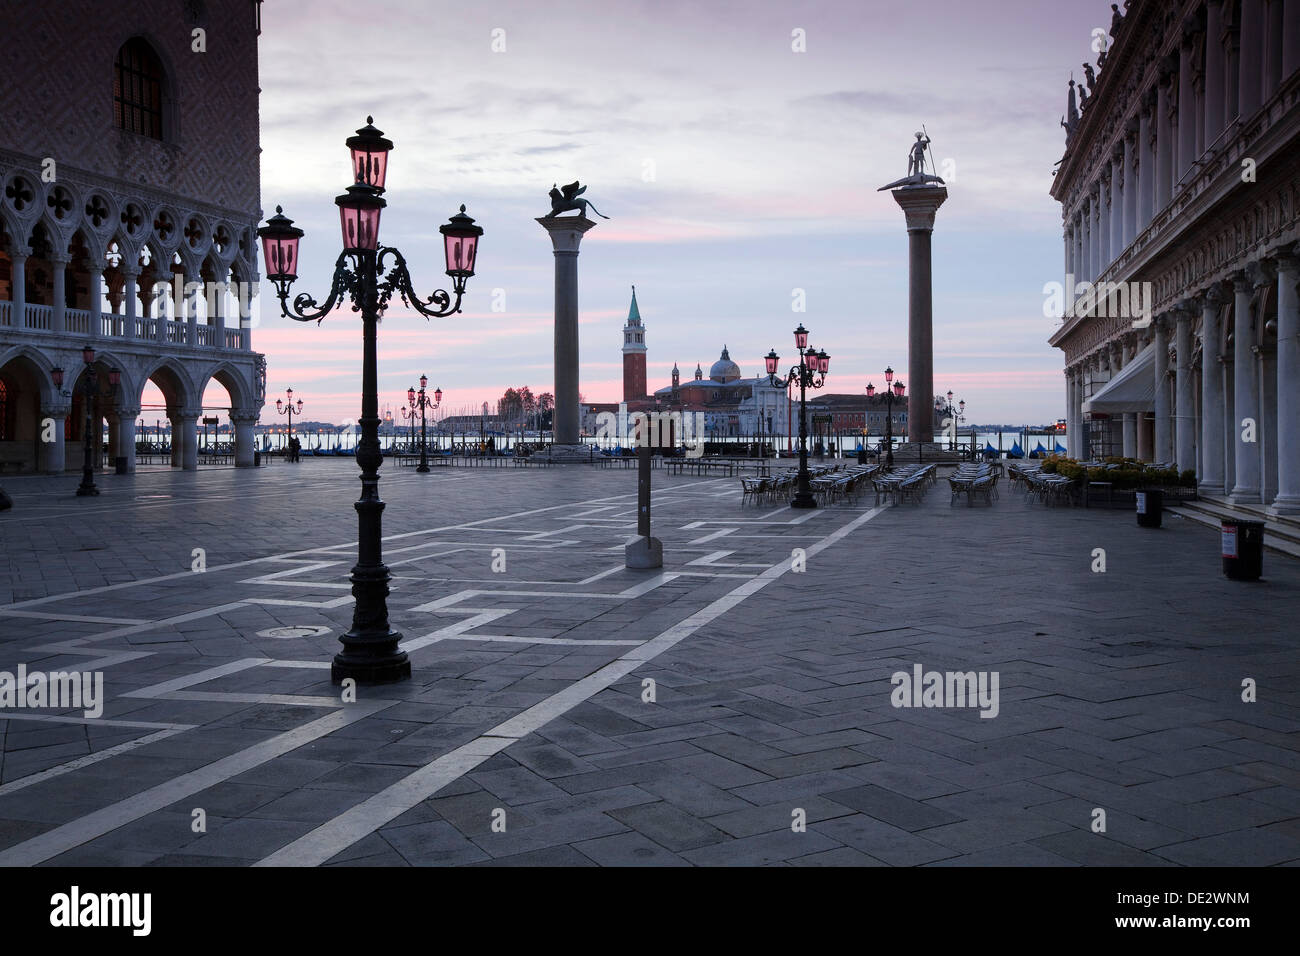 maggiore photography San and dusk images Alamy - stock hi-res giorgio at